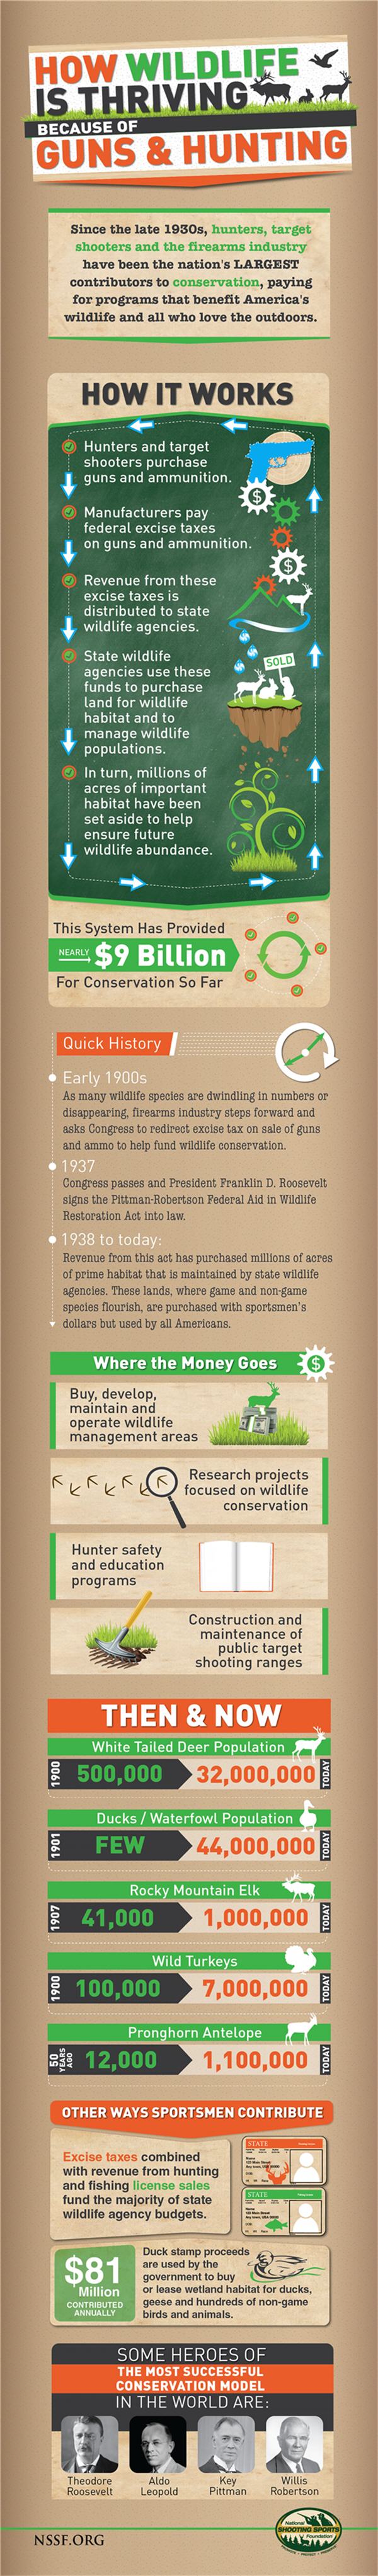 infographic howwildlifeisthriving because ofguns